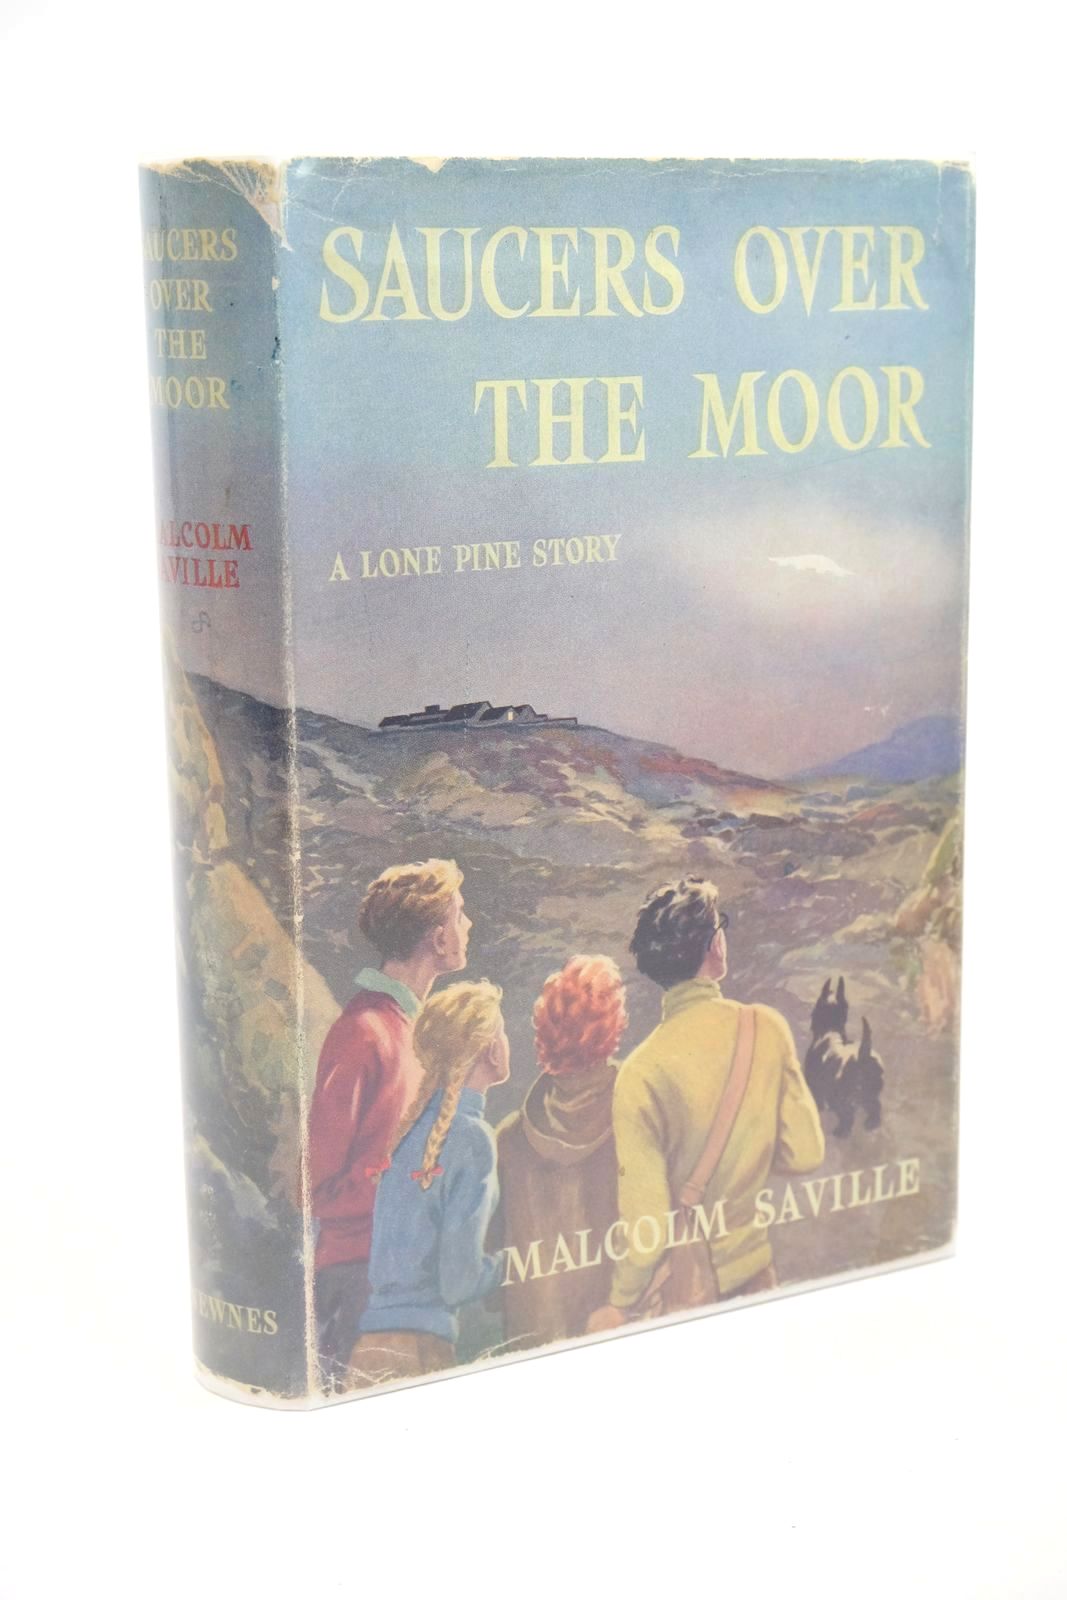 Photo of SAUCERS OVER THE MOOR written by Saville, Malcolm illustrated by Prance, Bertram published by George Newnes Ltd. (STOCK CODE: 1323205)  for sale by Stella & Rose's Books